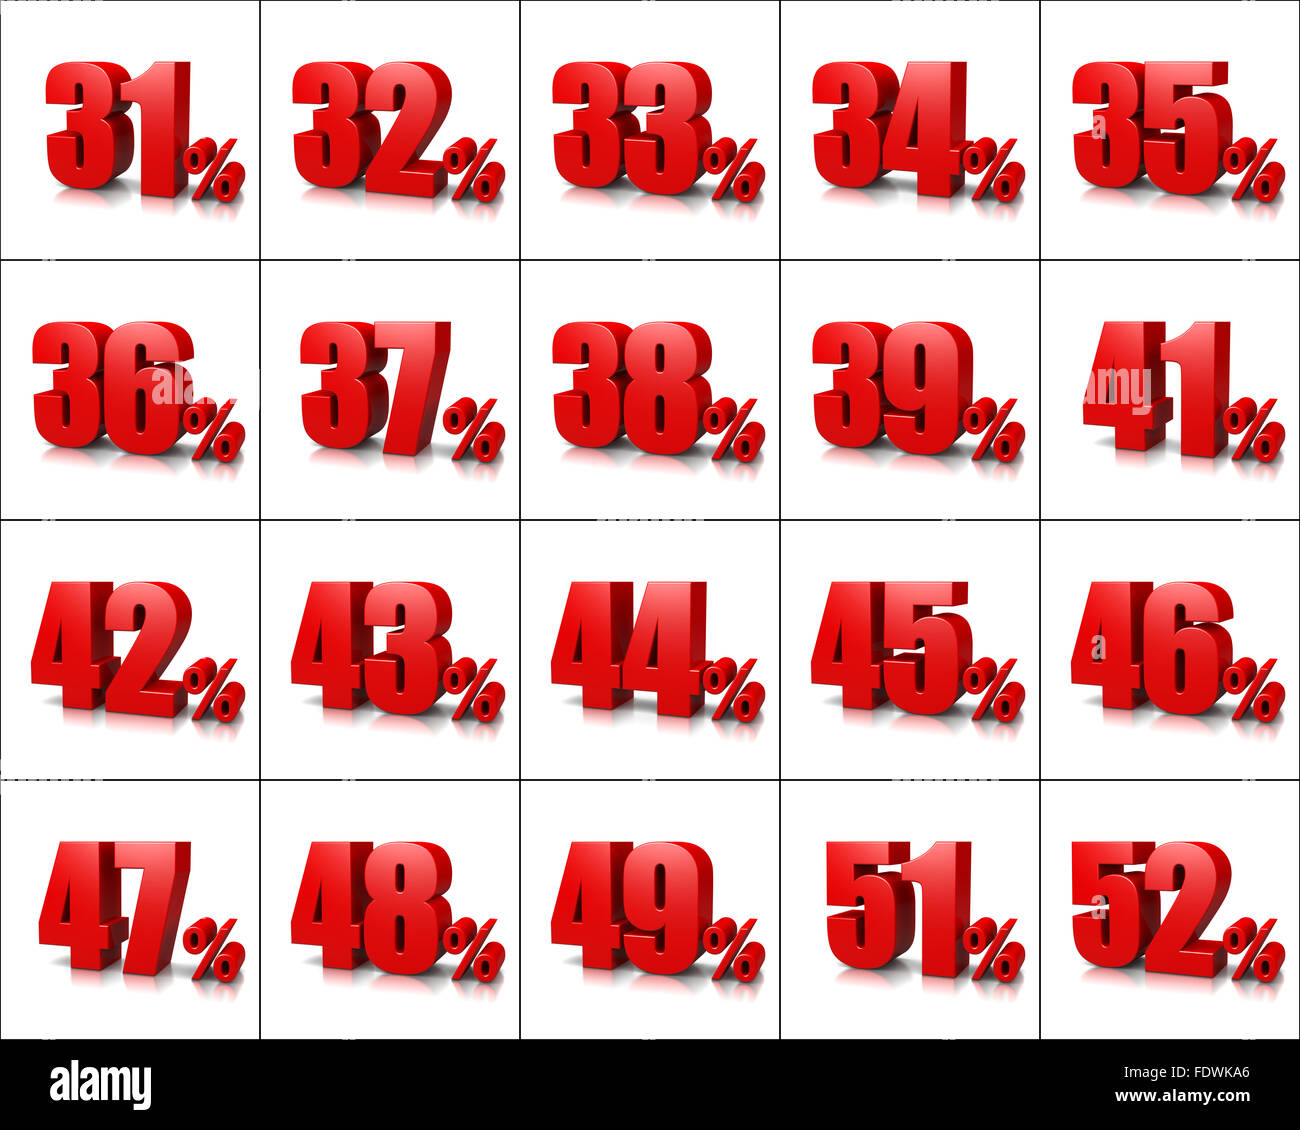 Red Percentage Numbers Series on White Background Illustration Stock Photo